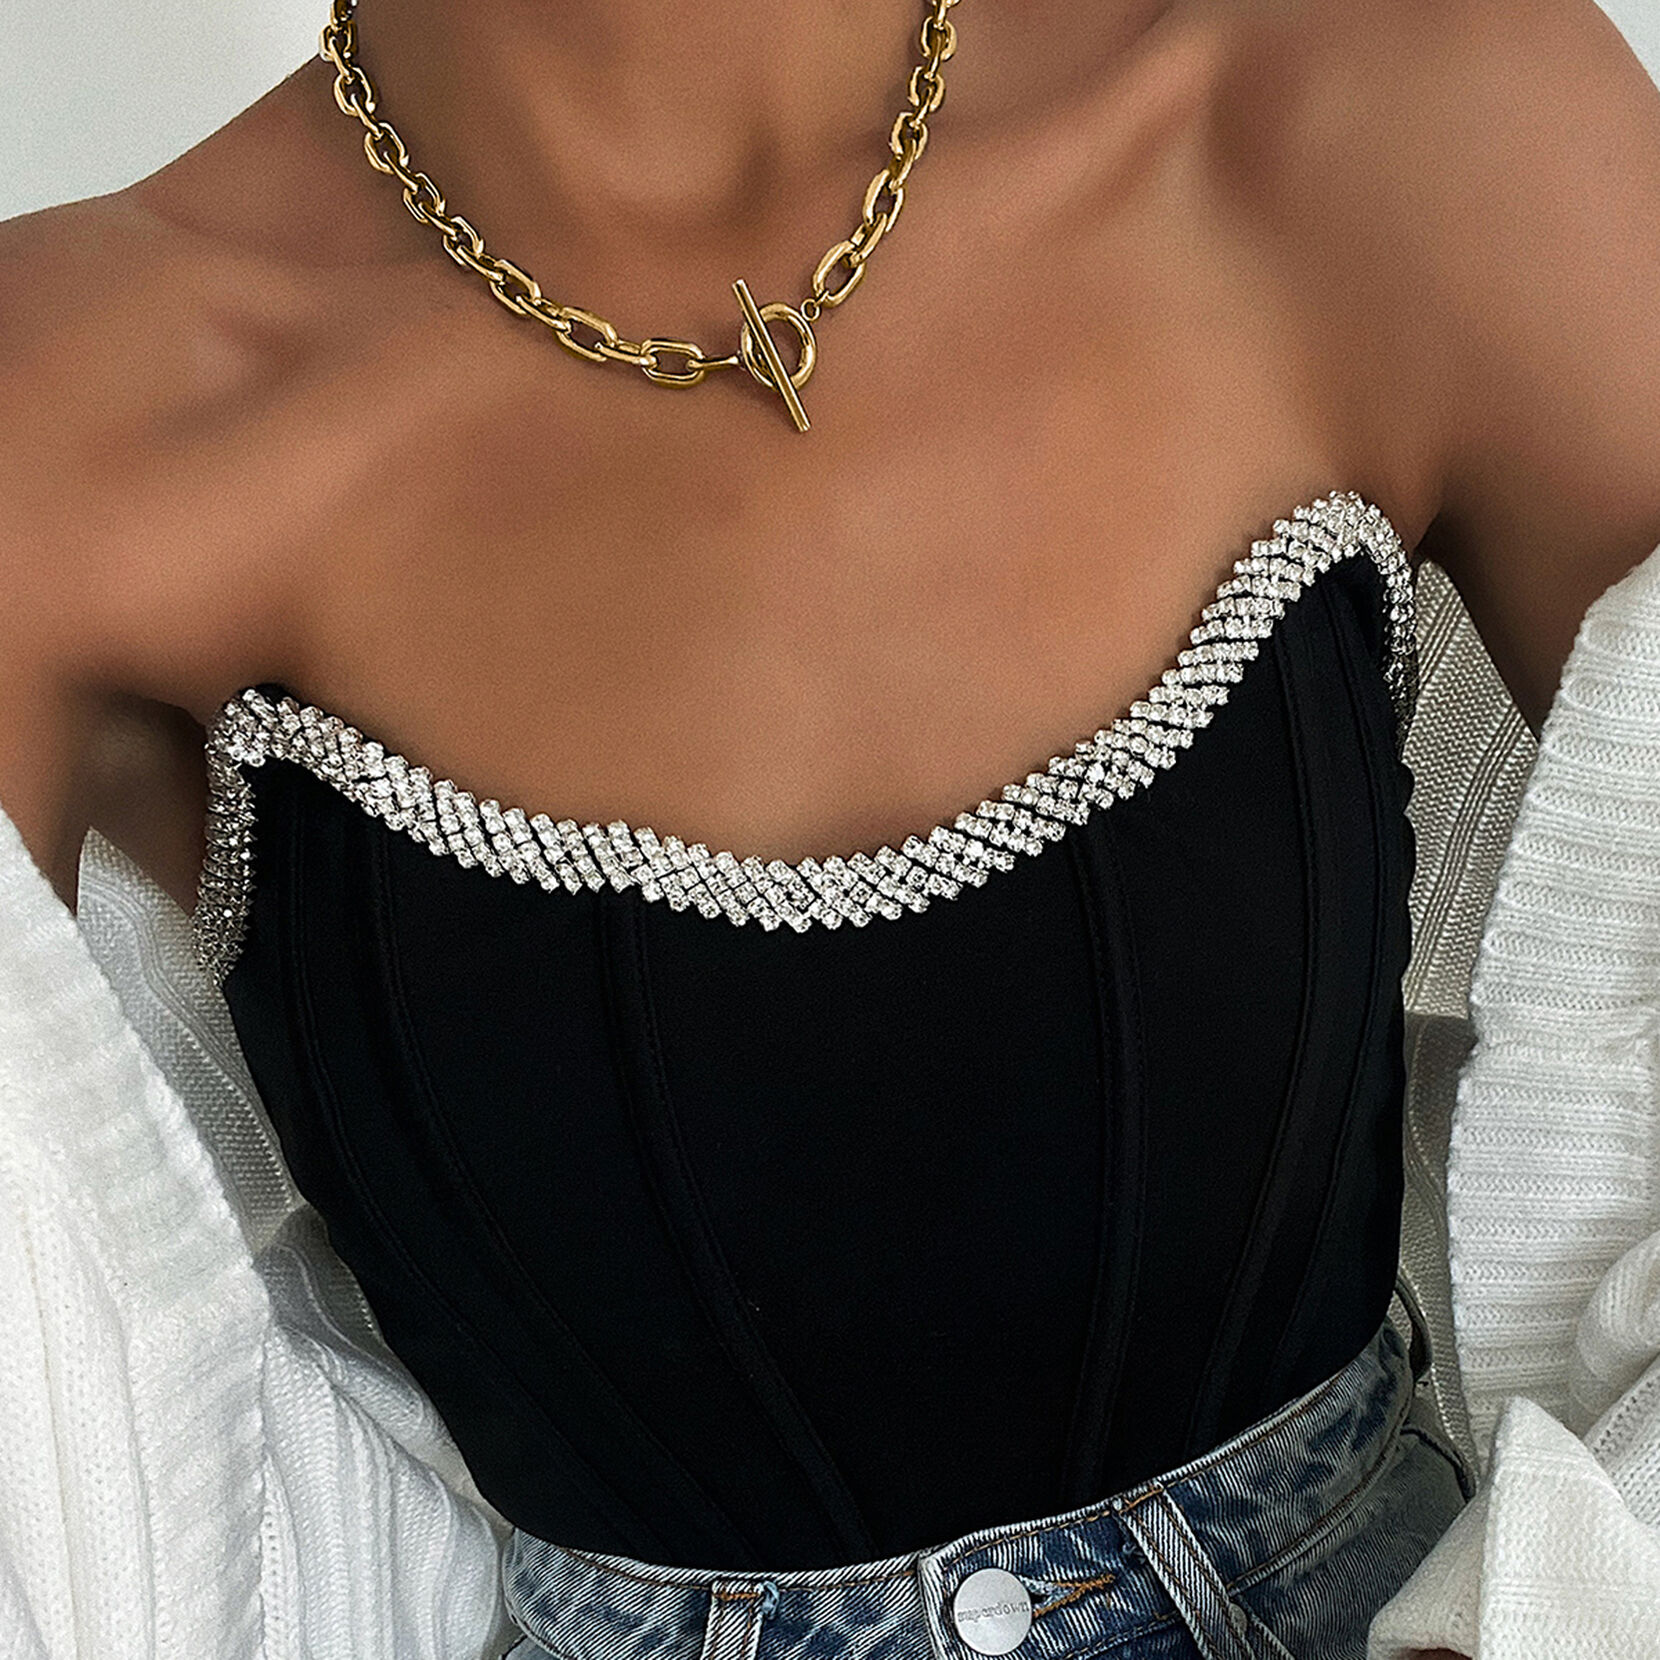 Gold Toggle Necklace Chunky Chain Choker Chunky Chain Link Necklace  Stacking Necklace Front Toggle Necklace Toggle Clasp Necklace 